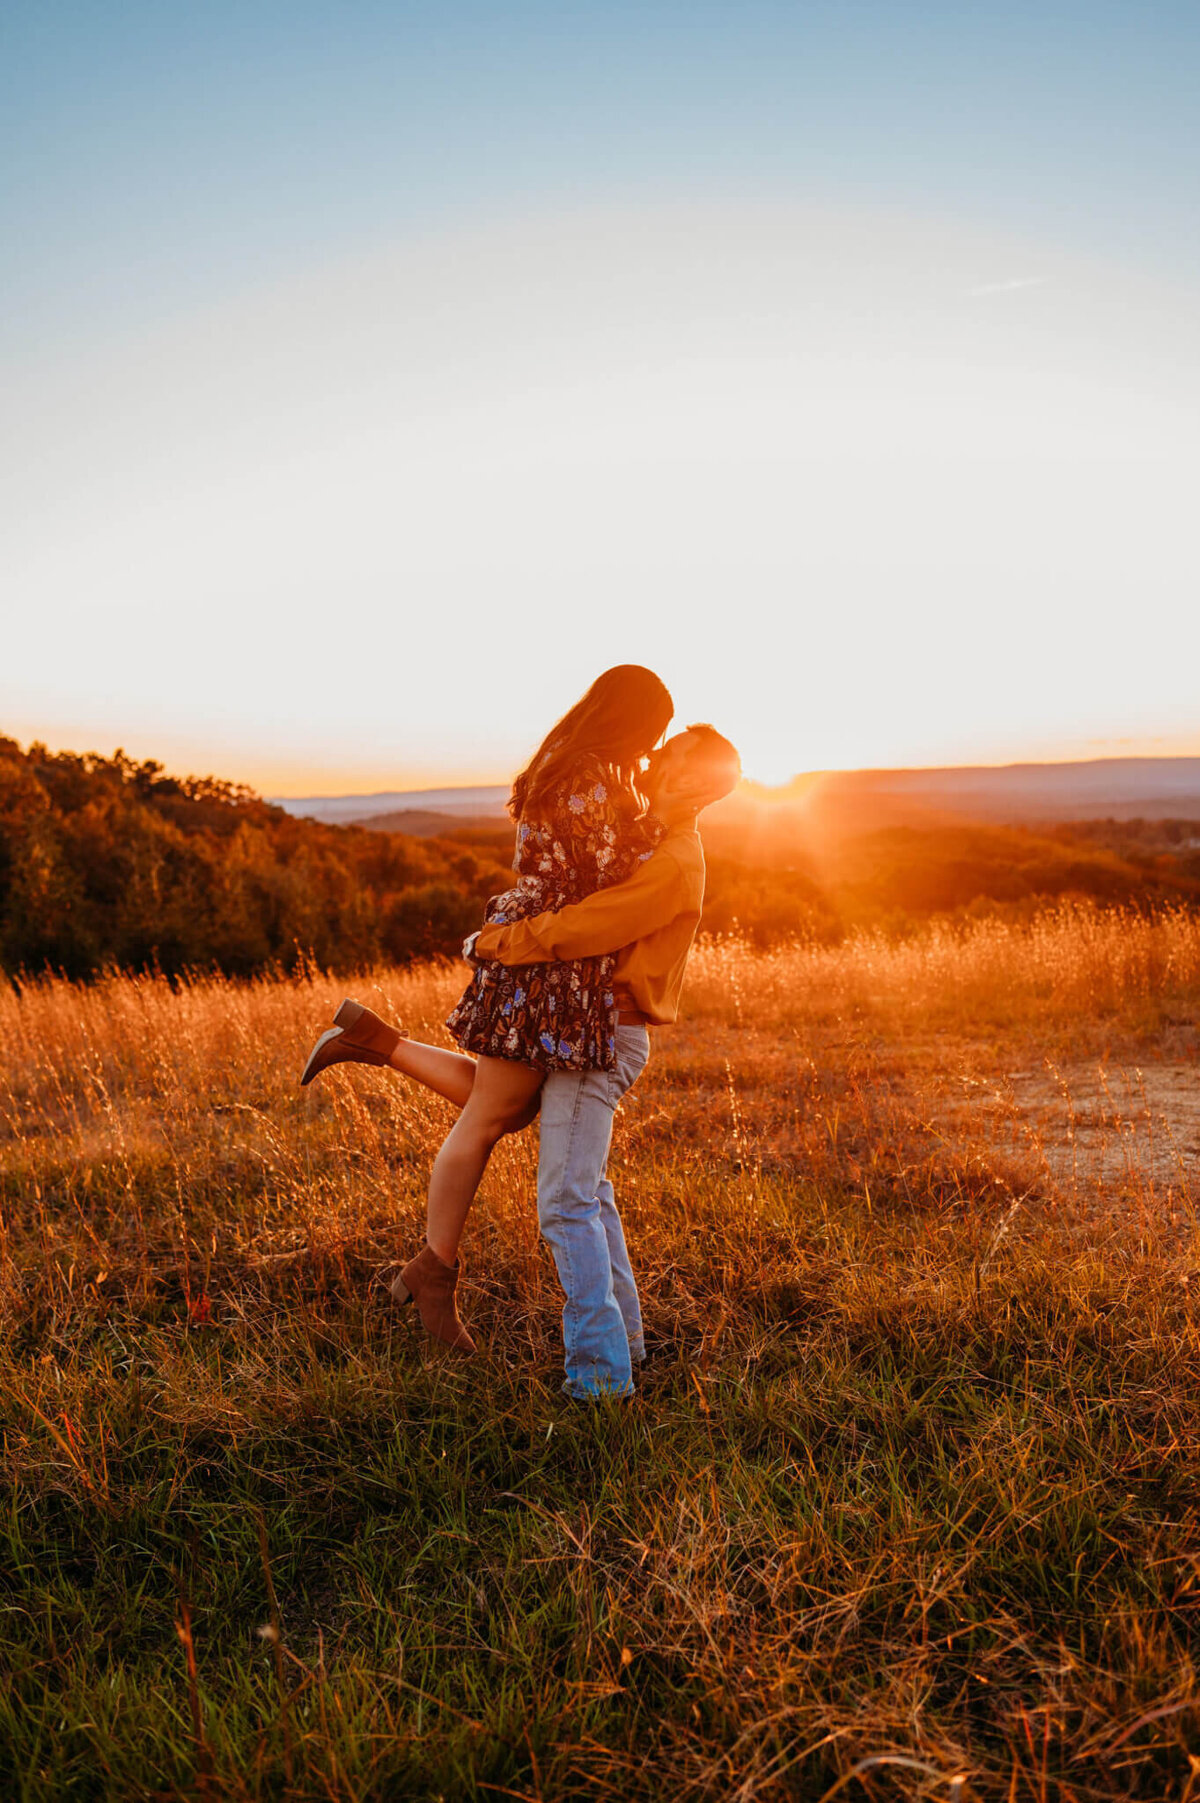 photo of a man picking up his fiancee romantically while in a field